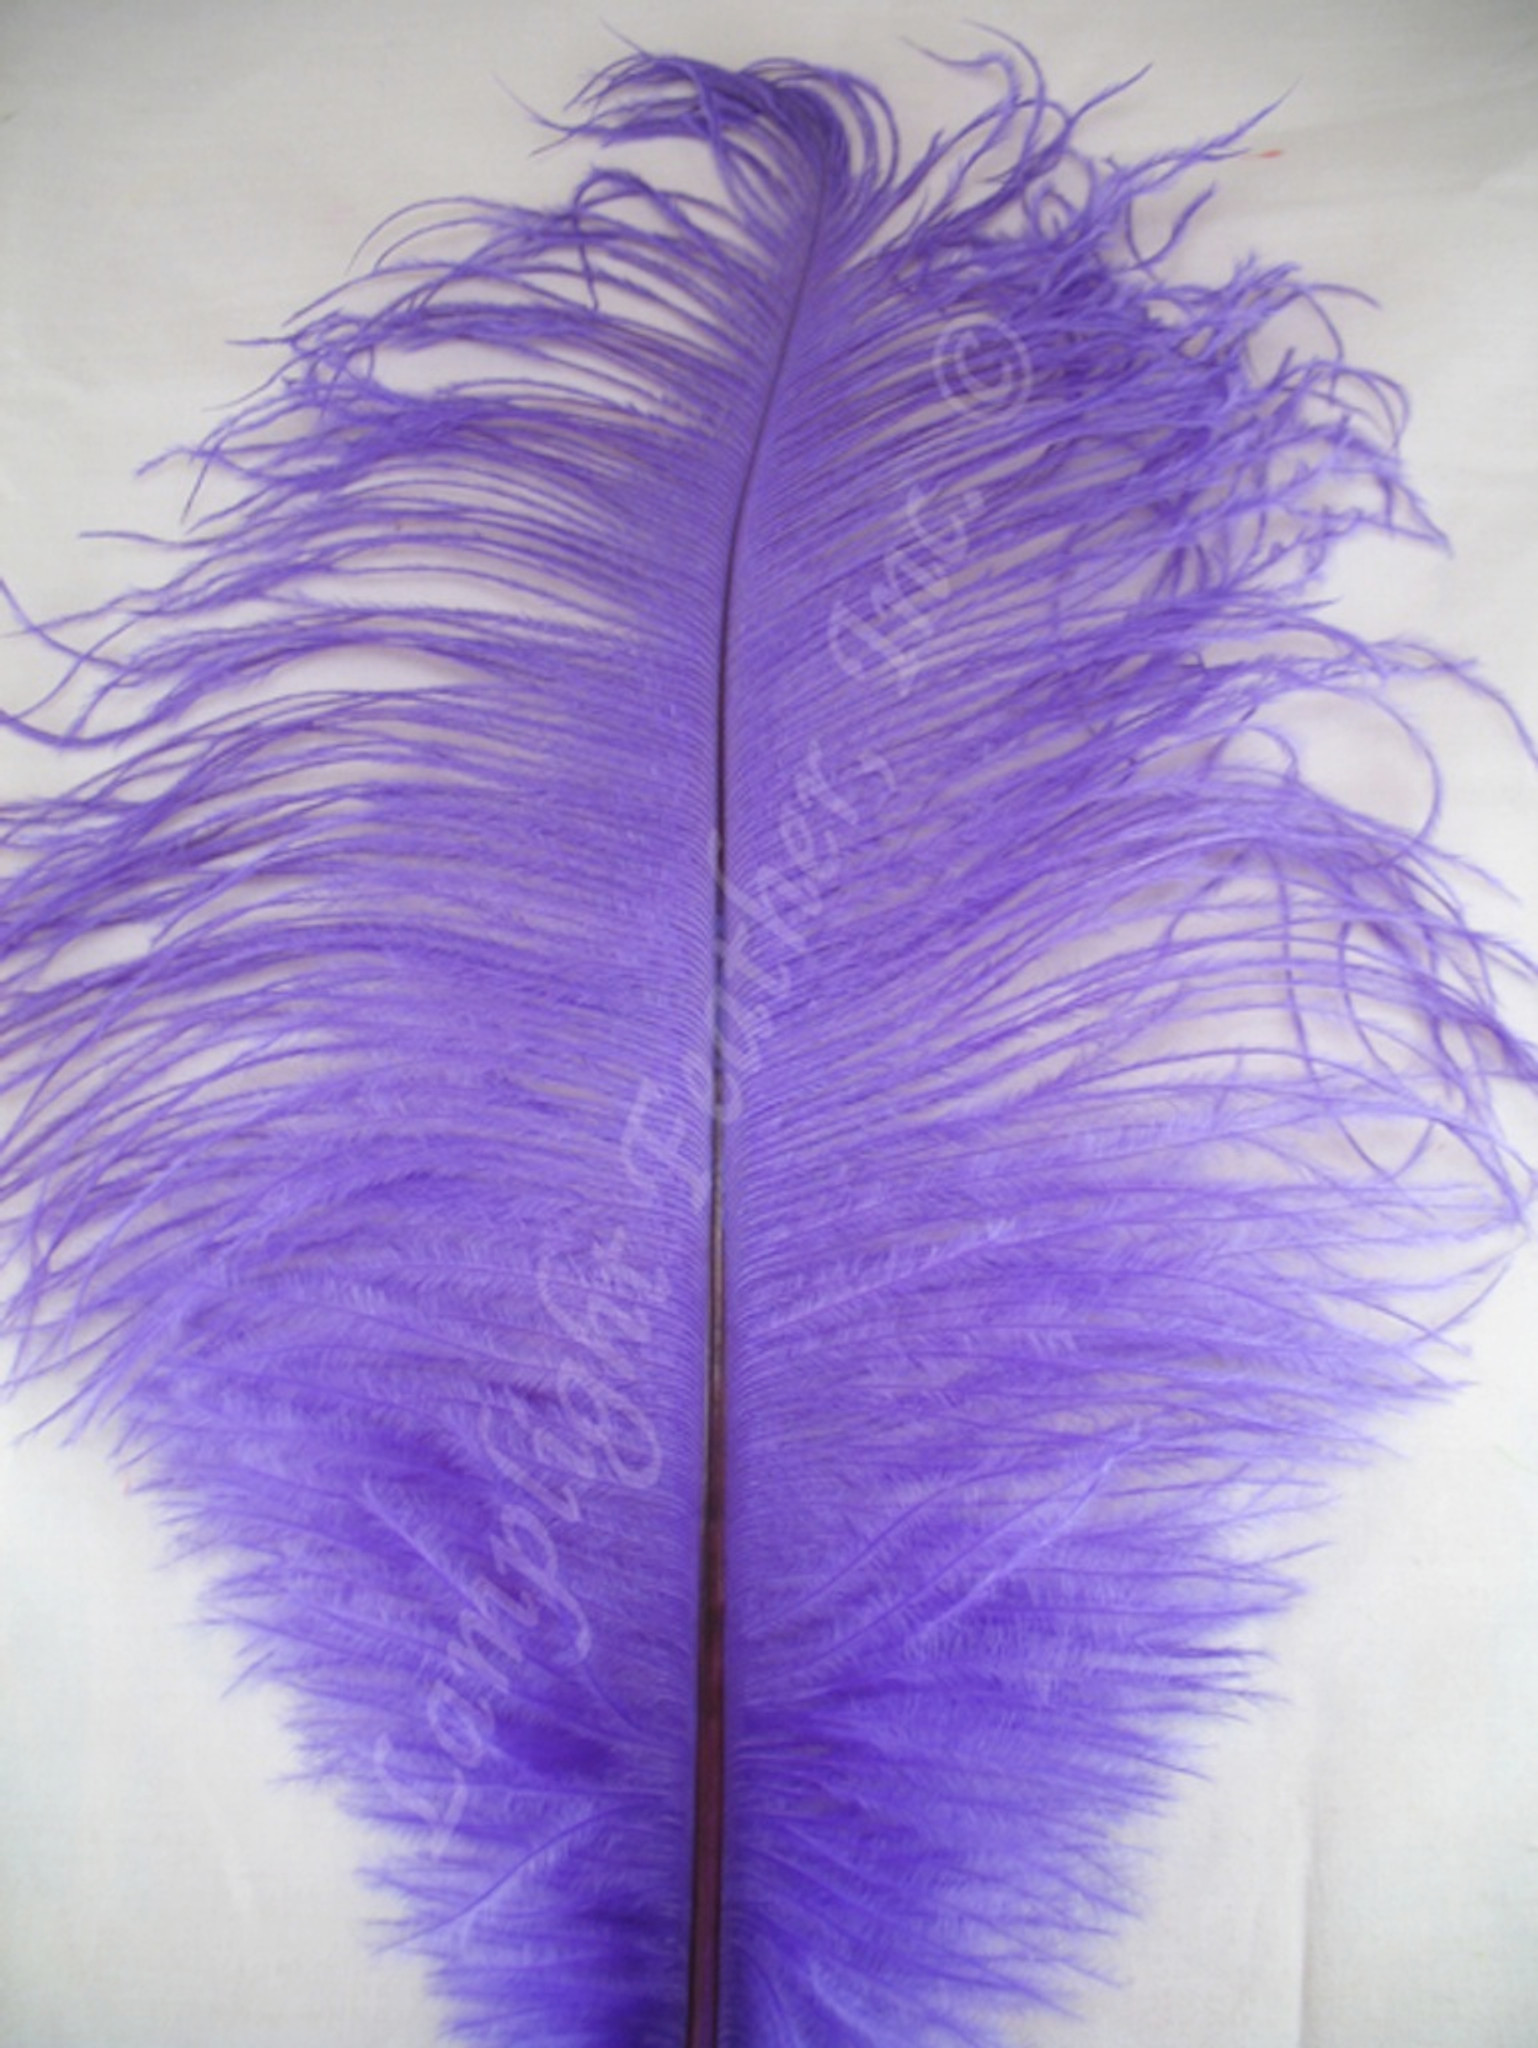 Lavender Ostrich Feathers 12-16 inch long per each